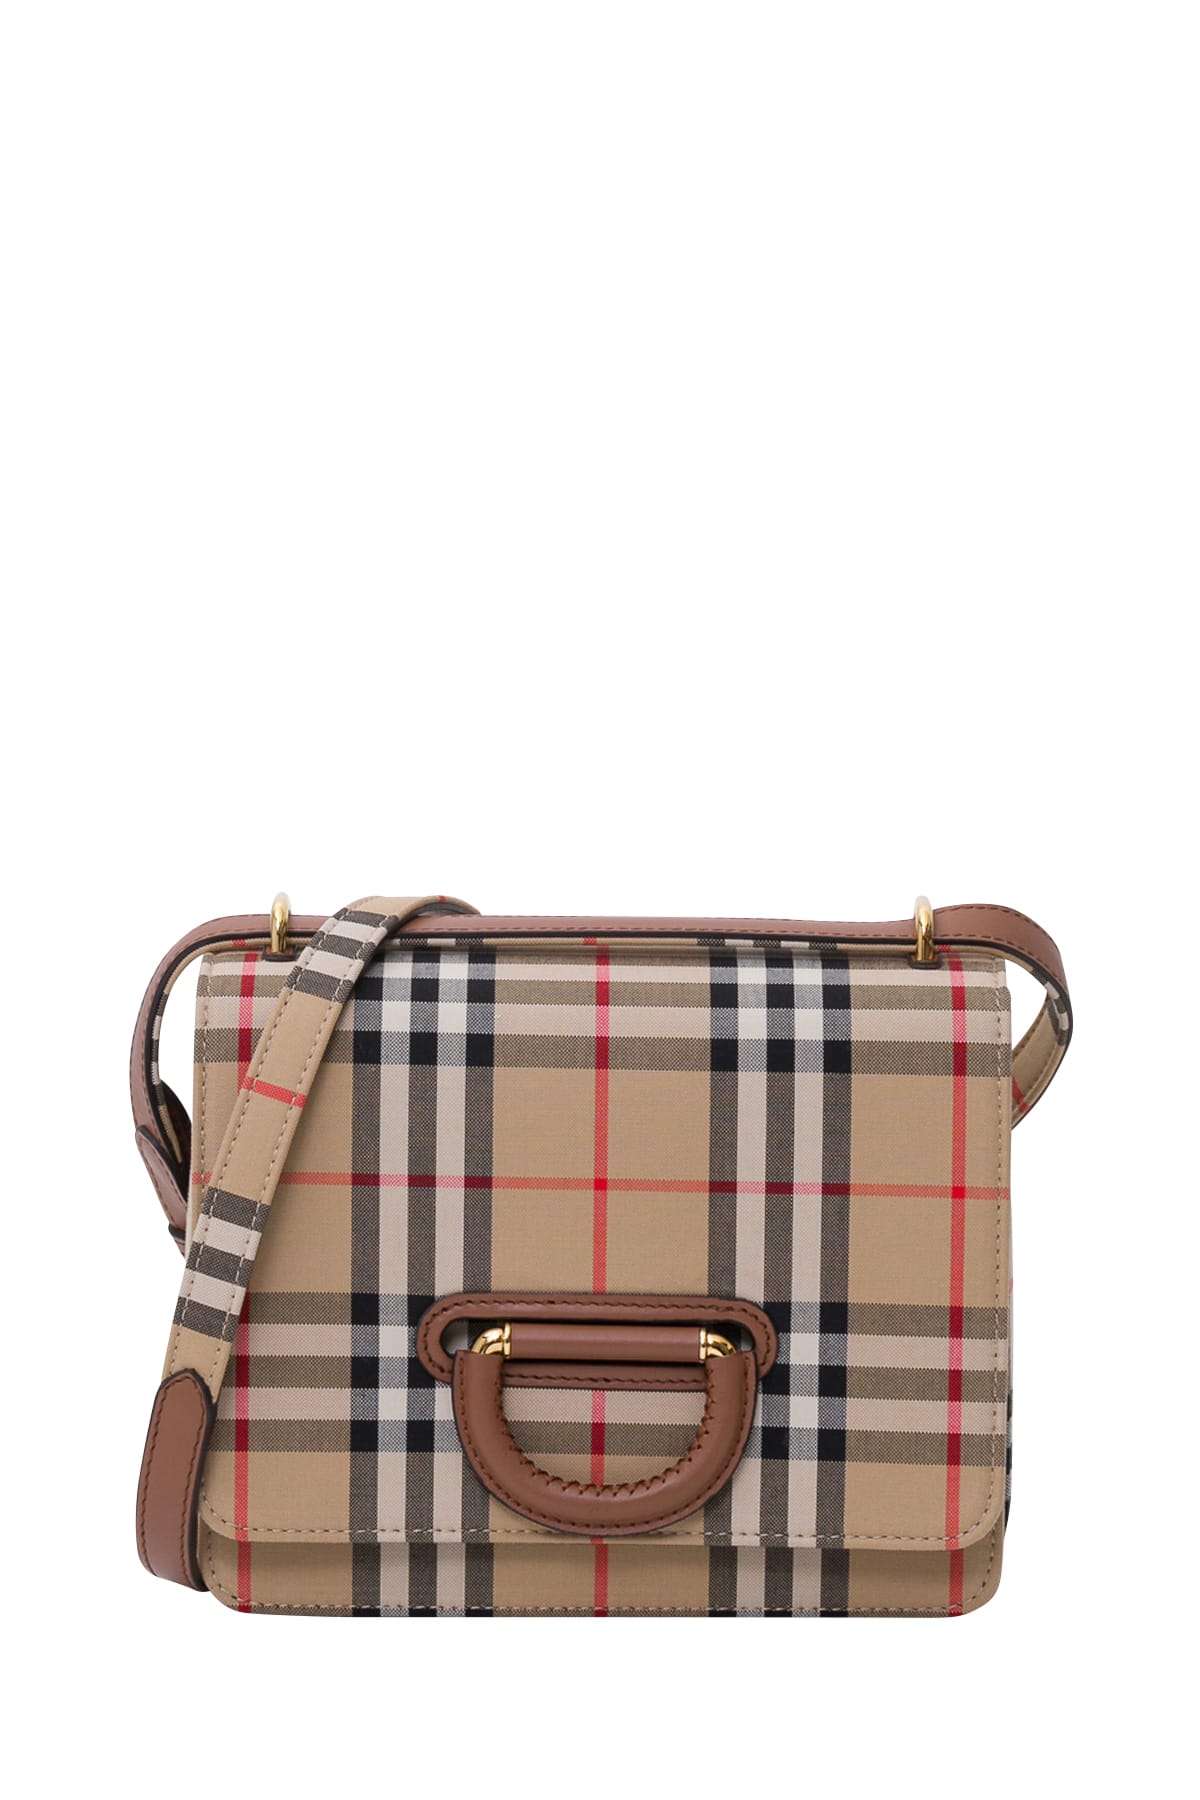 burberry small d ring bag